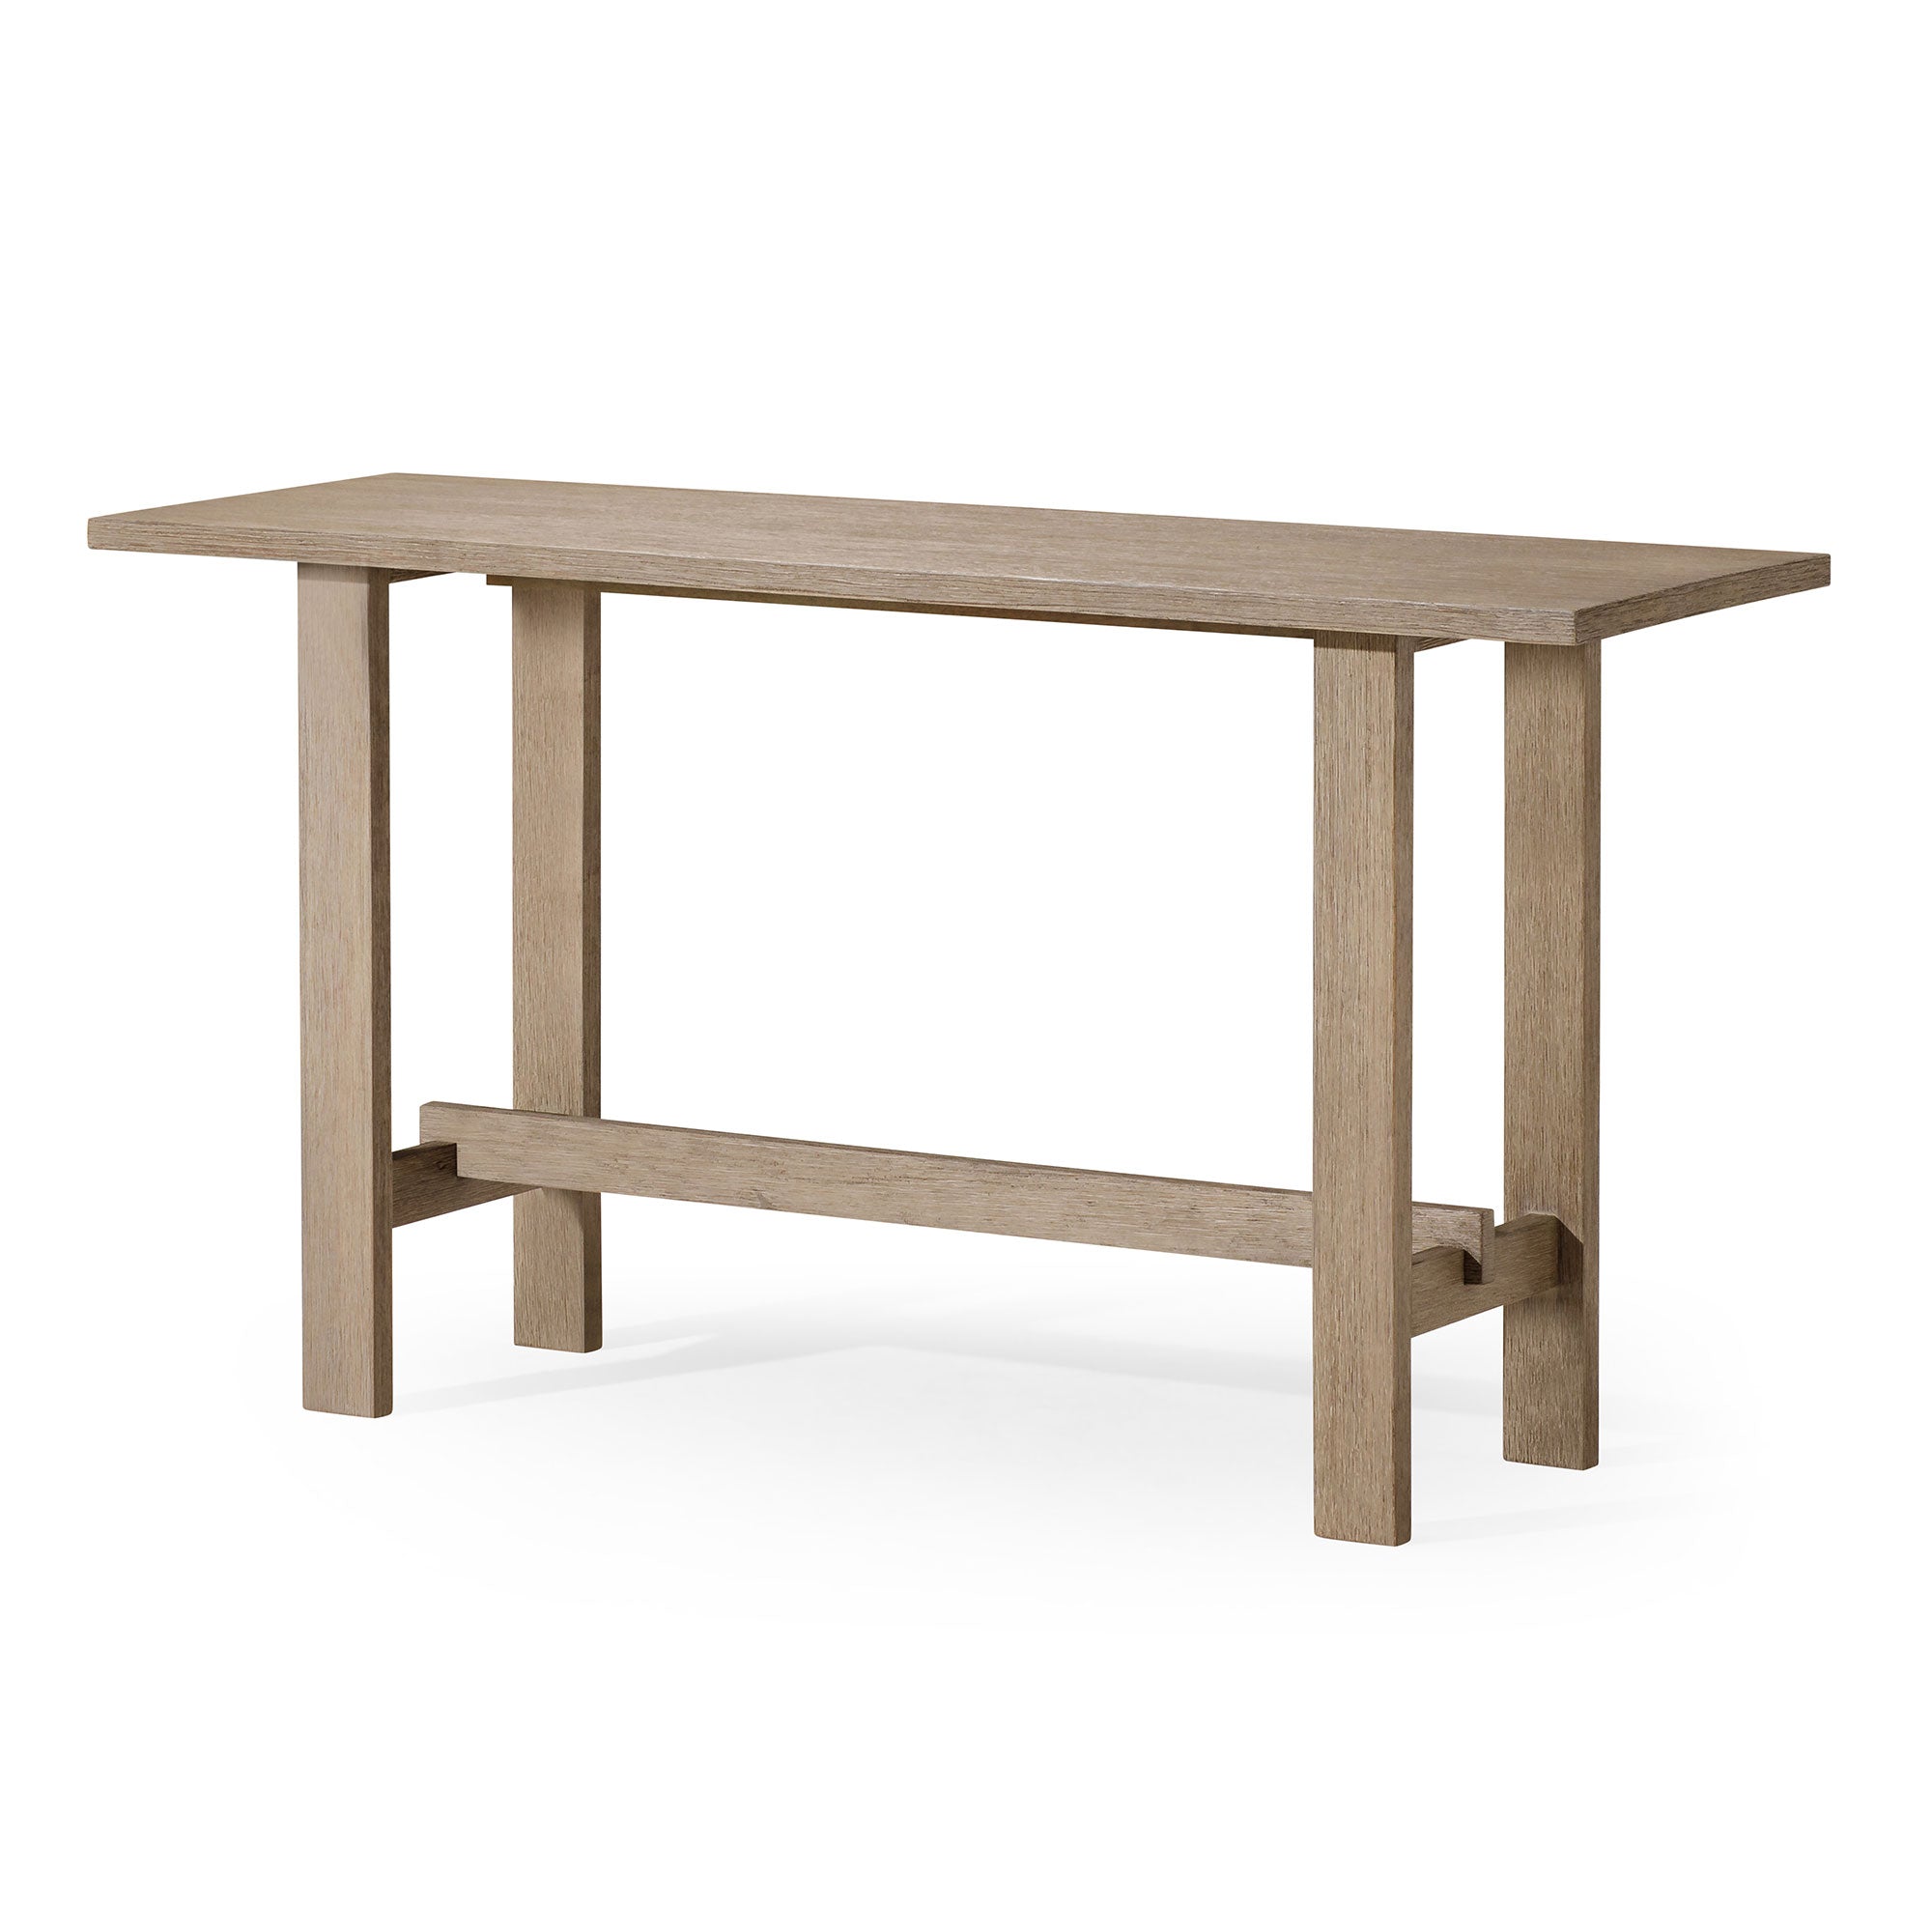 Hera Organic Wooden Console Table in Weathered Grey Finish